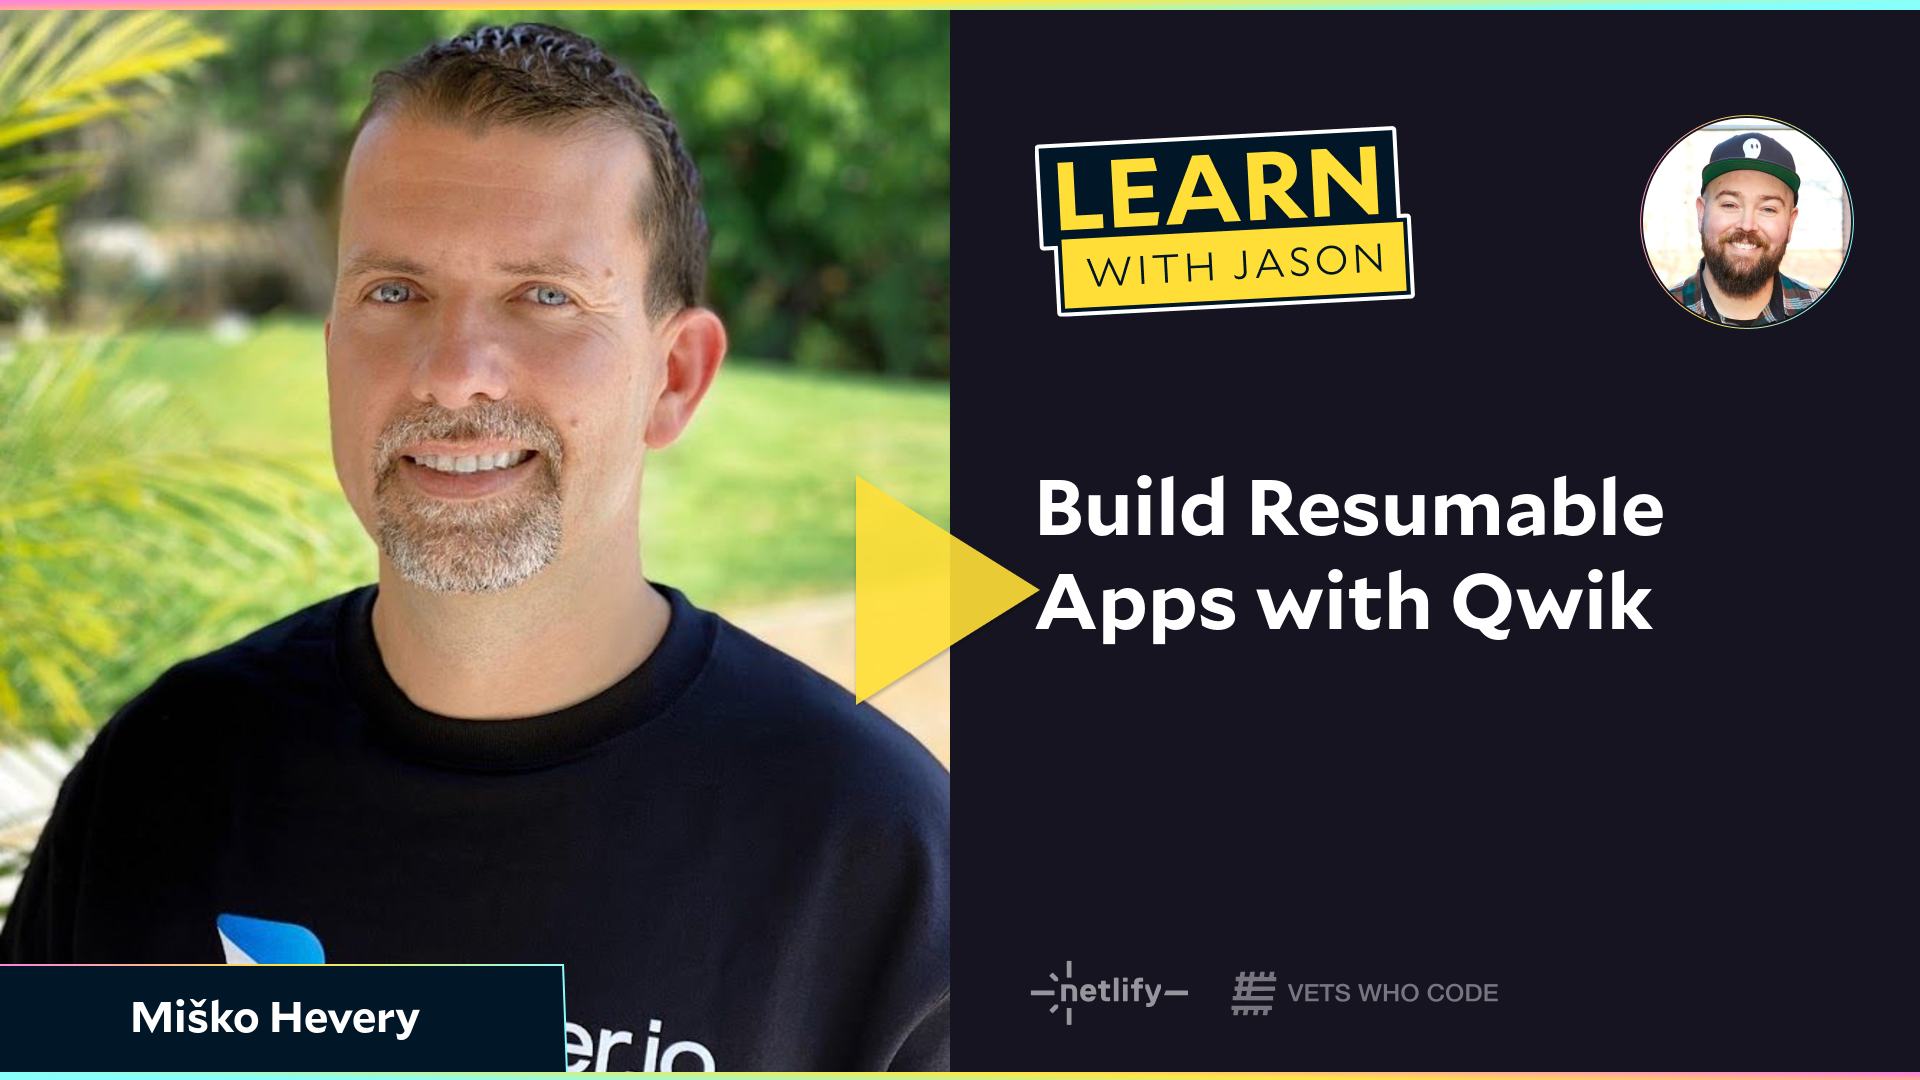 Build Resumable Apps with Qwik (with Miško Hevery)